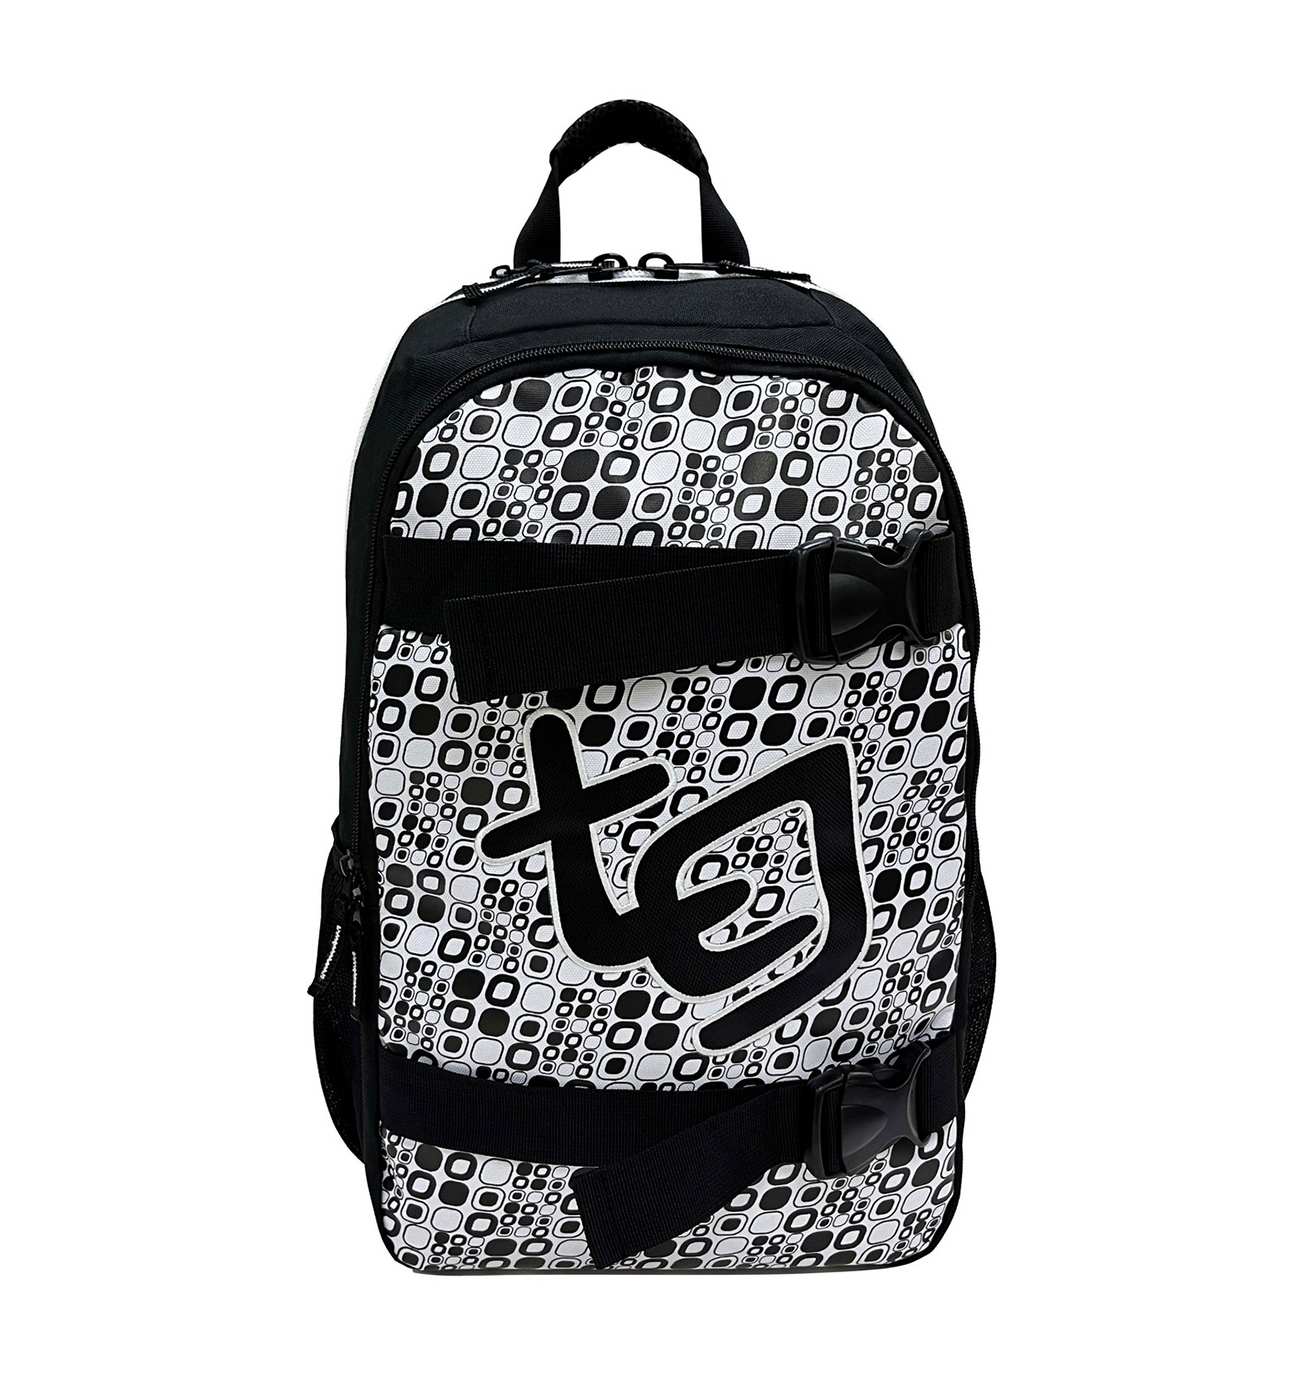 Tech Gear Park Central Backpack - Black; image 1 of 3